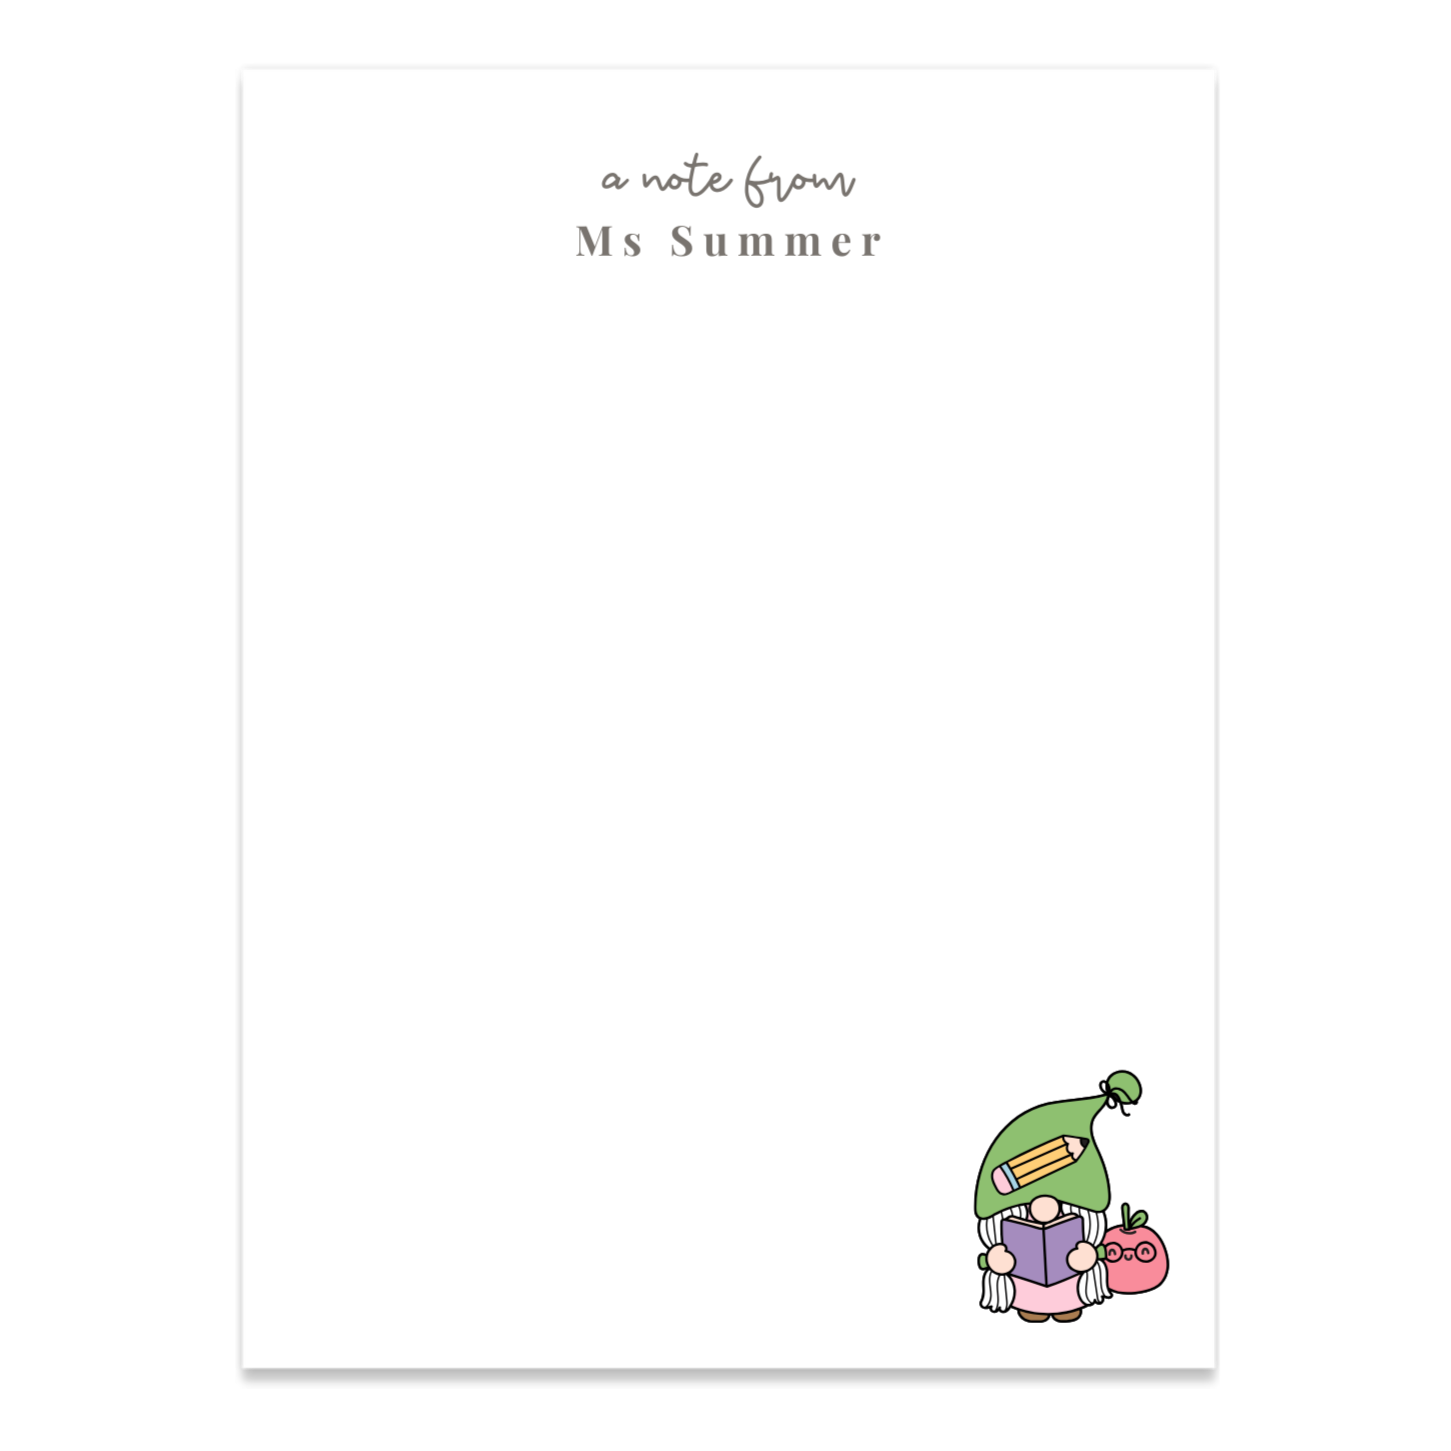 Personalized notepads are the perfect gift a teacher would love to get. Customized with their name and a Gnome teacher on the bottom right corner, this notepad is wrapped in cellophane ready to be gifted!